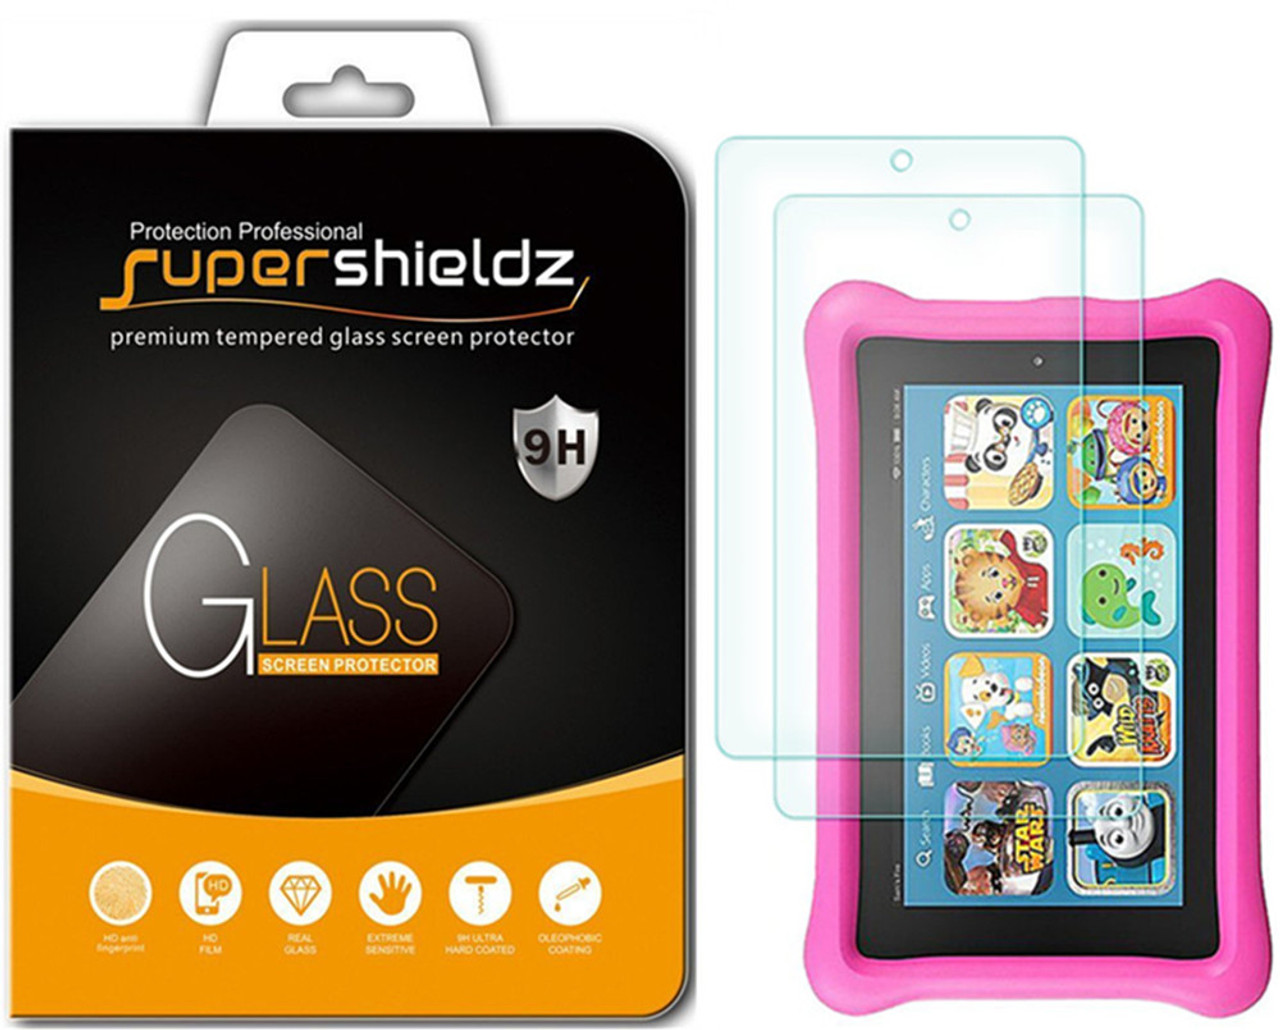 Supershieldz Amazon Fire 7 Tablet Tempered Glass Screen Protector 2017/2019 